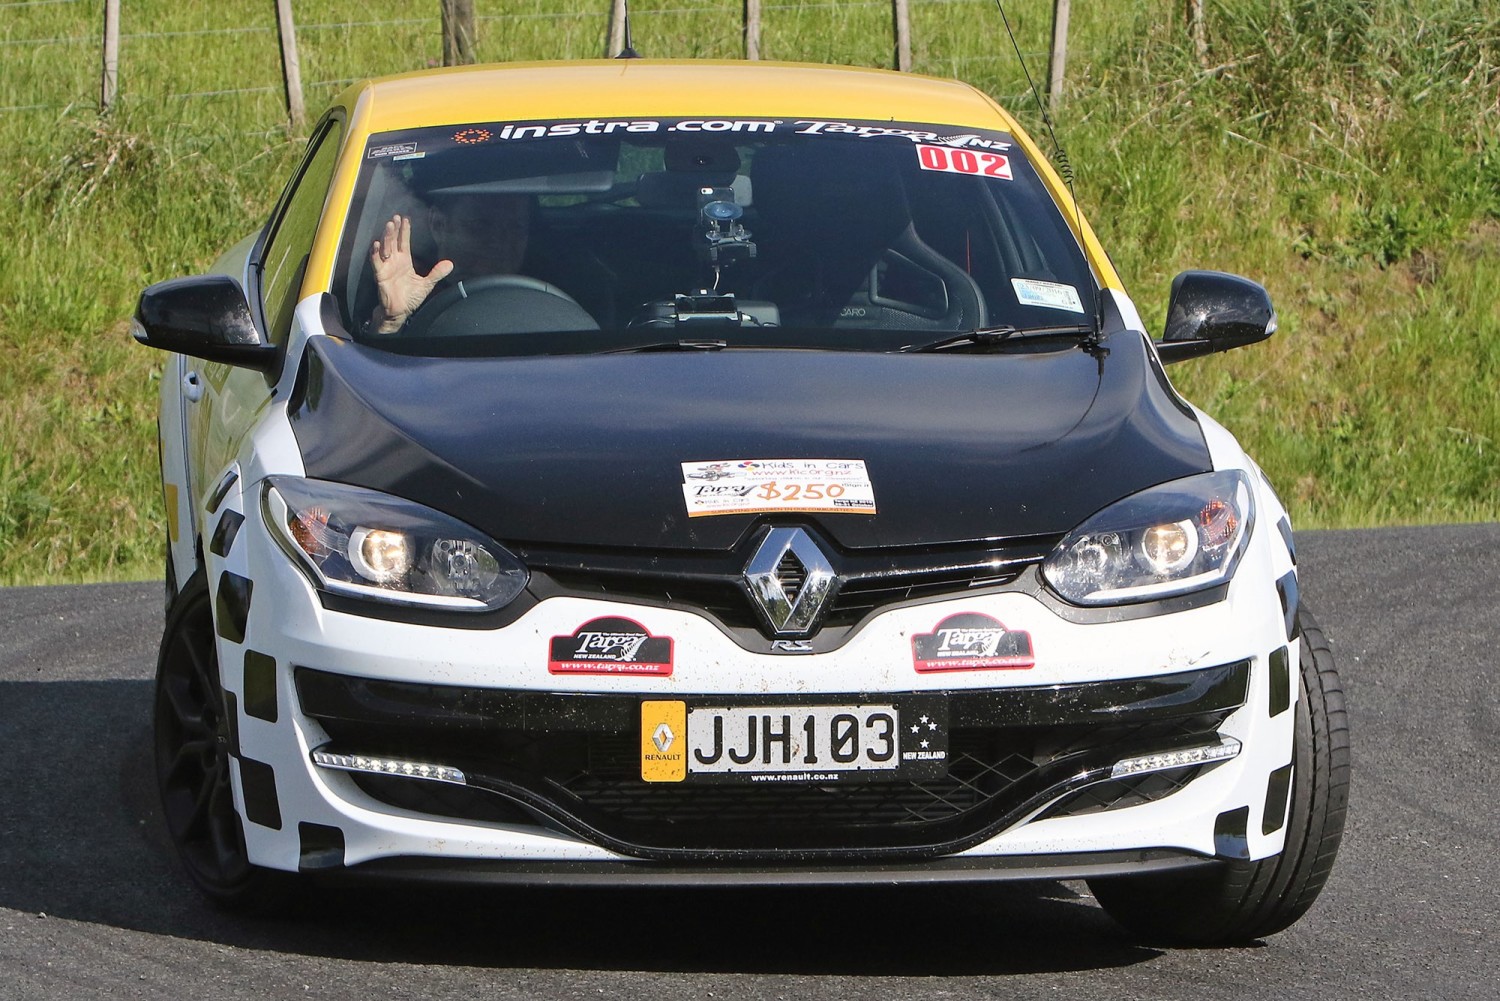 Racing Ray Williams drove the Renault Megane RS 275 in the Targa Rally 2015. Photo / Proshotz Photography For use in Driven Magazine DRIVEN USE ONLY